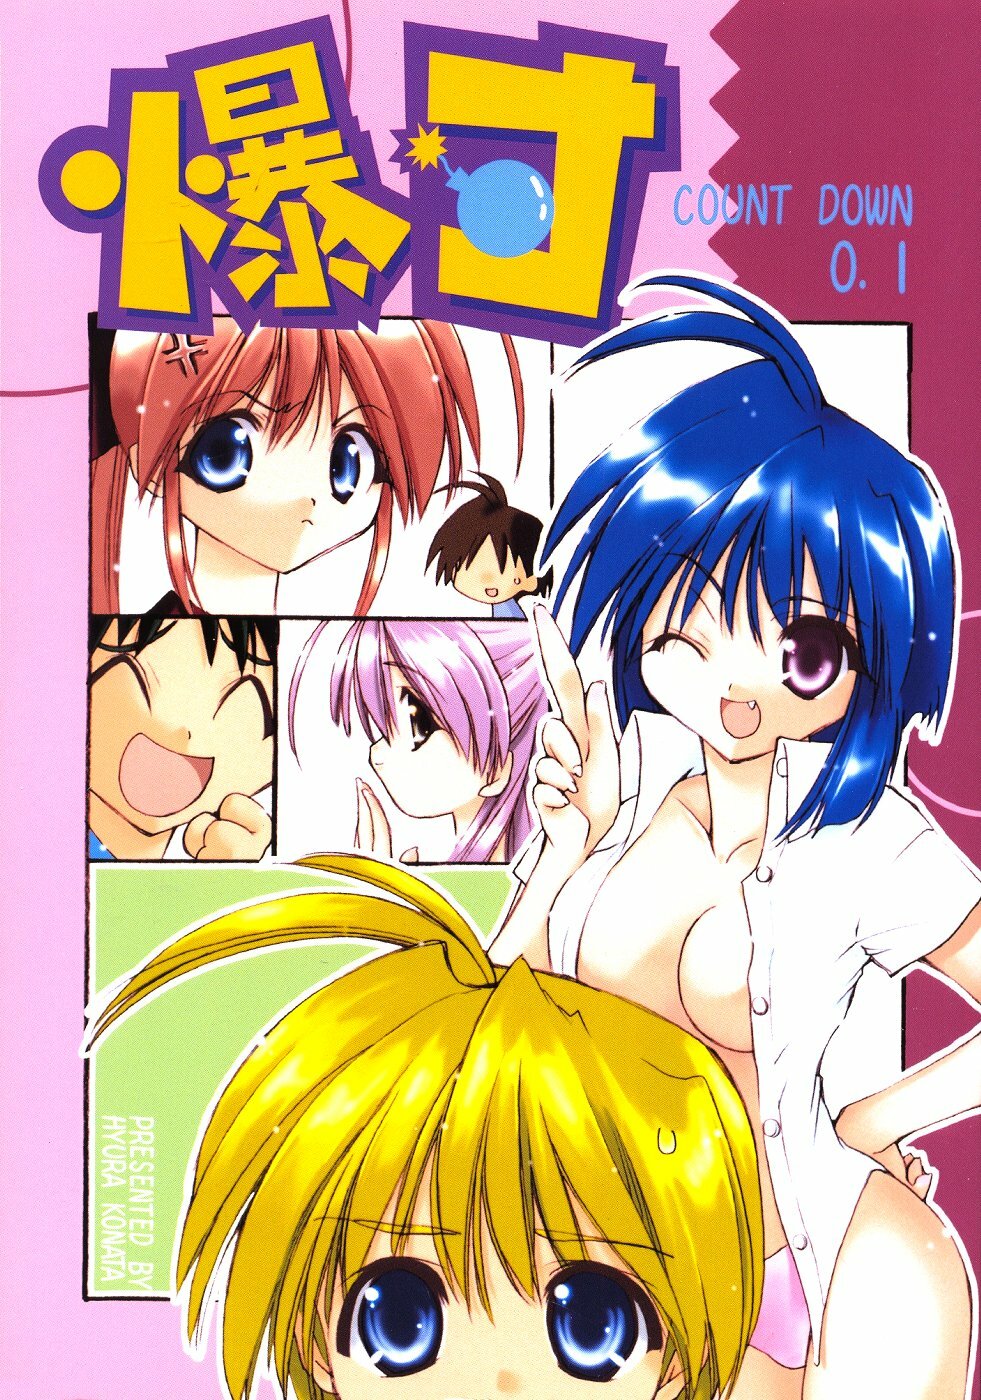 (C61) [Your's Wow (Konata Hyuura)] Bakusun Attention! Burst!! Count Down 0.1 page 1 full